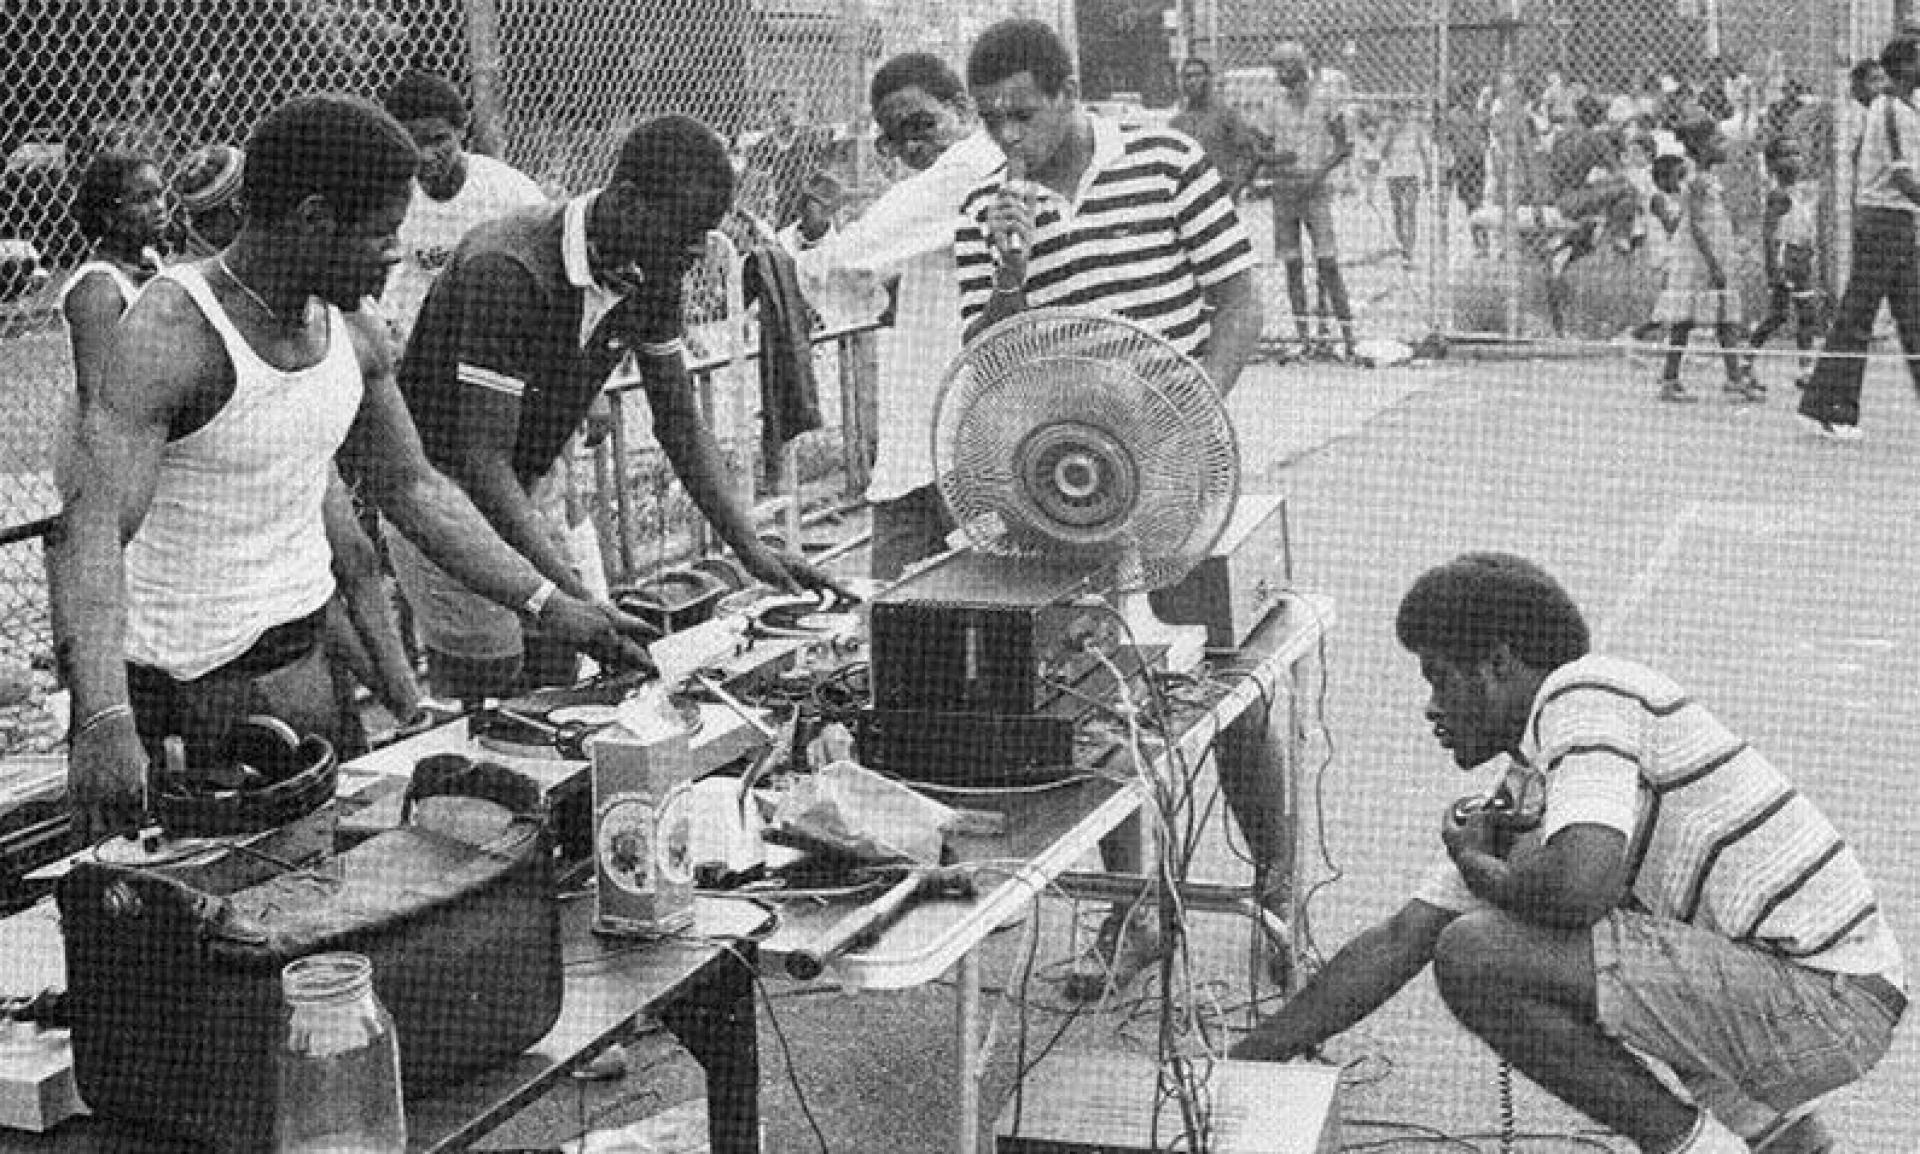 DJ Kool Herc sets up for the legendary block party at 1520 Sedgwick Avenue, Bronx, NY. 11th August 1973 | Source via Urban Ubiquity